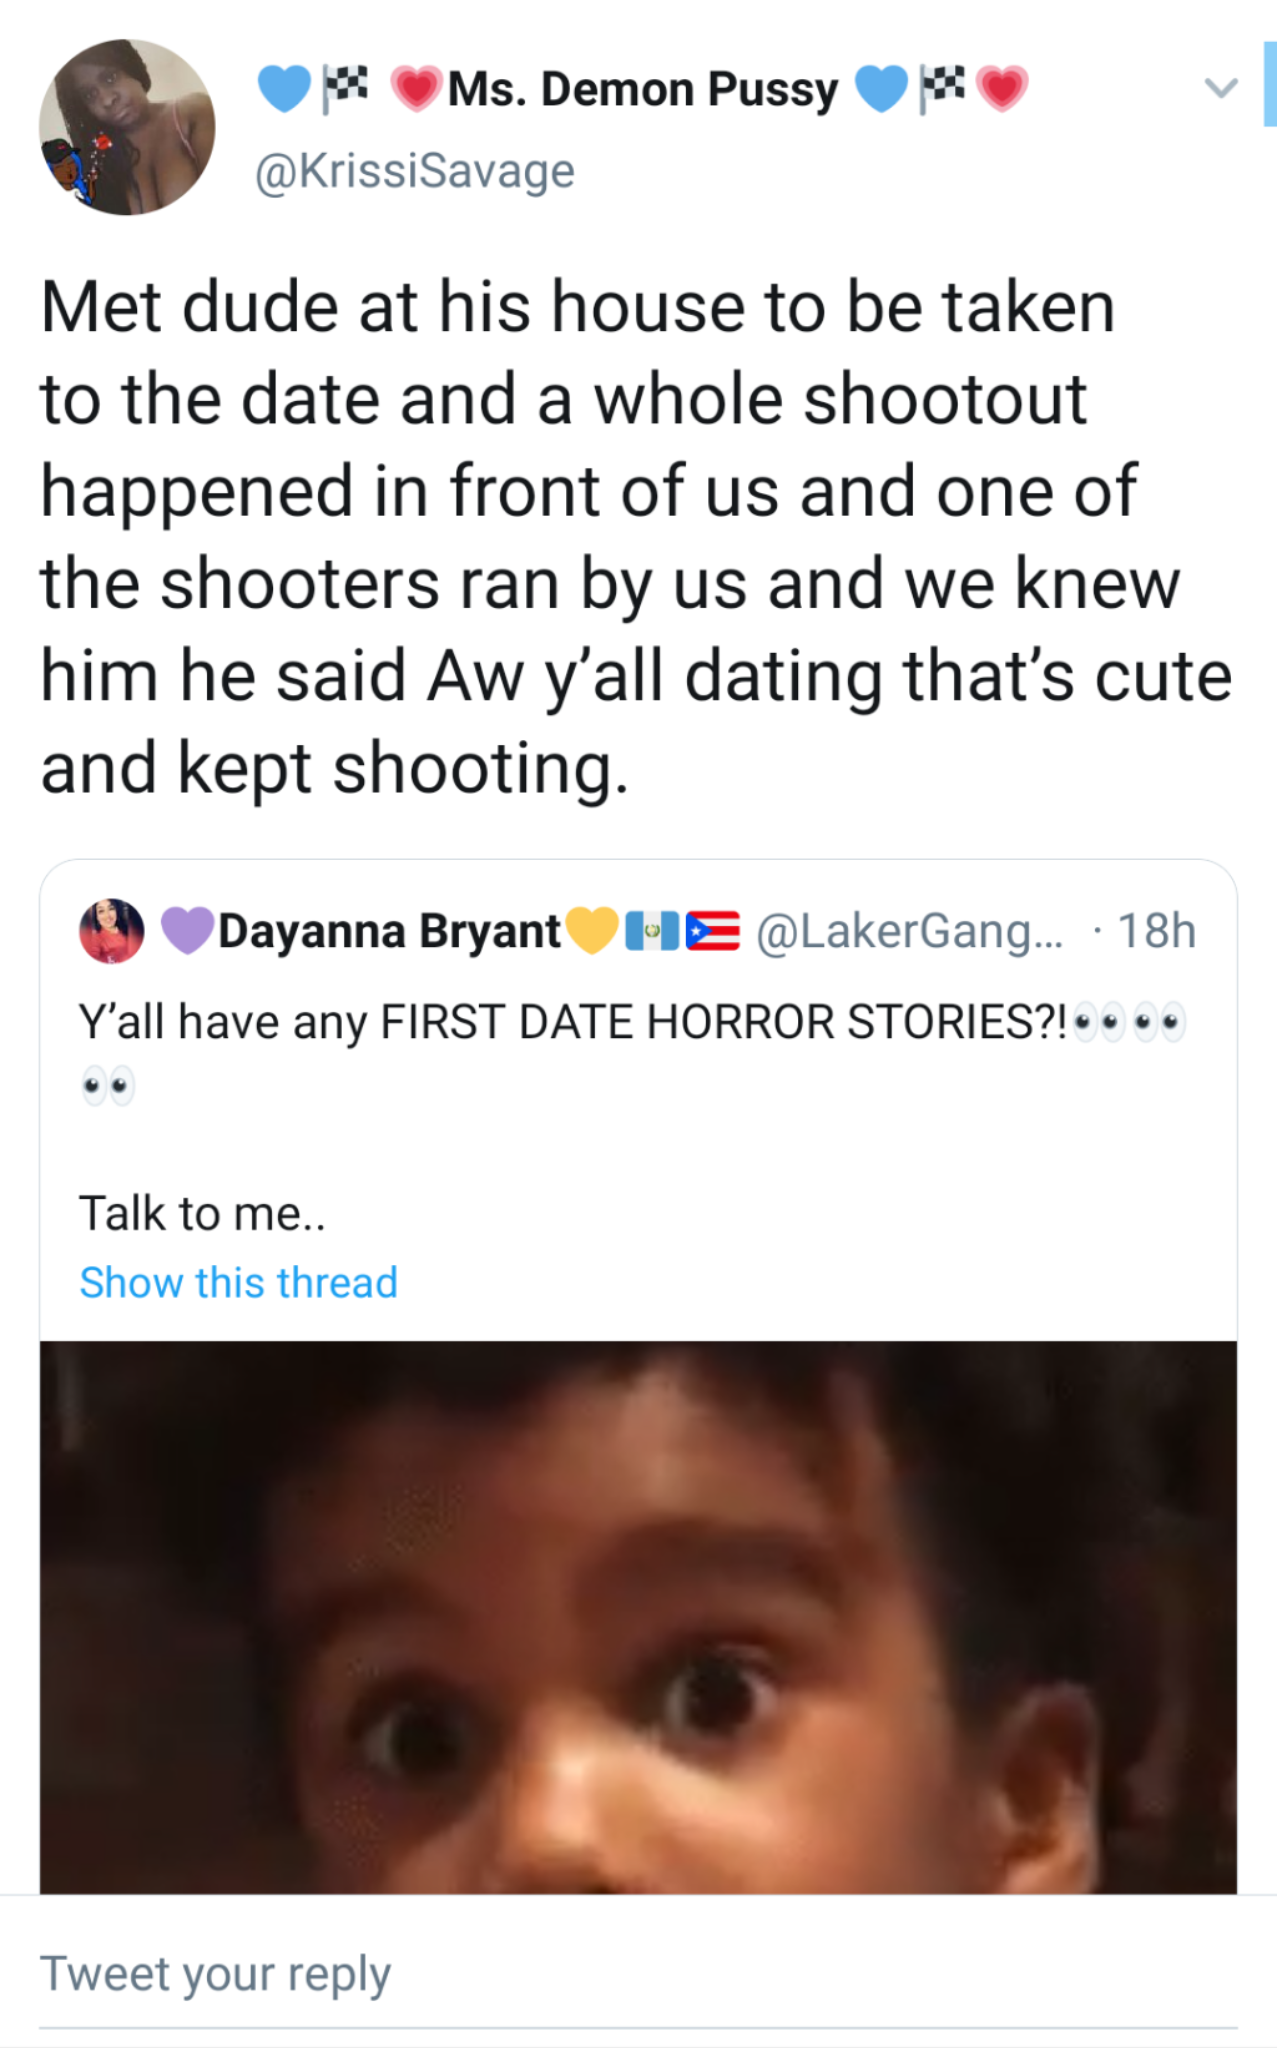 black twitter - Ms. Demon Pussy Met dude at his house to be taken to the date and a whole shootout happened in front of us and one of the shooters ran by us and we knew him he said Aw y'all dating that's cute and kept shooting. Dayanna Bryant He . 18h Y'a